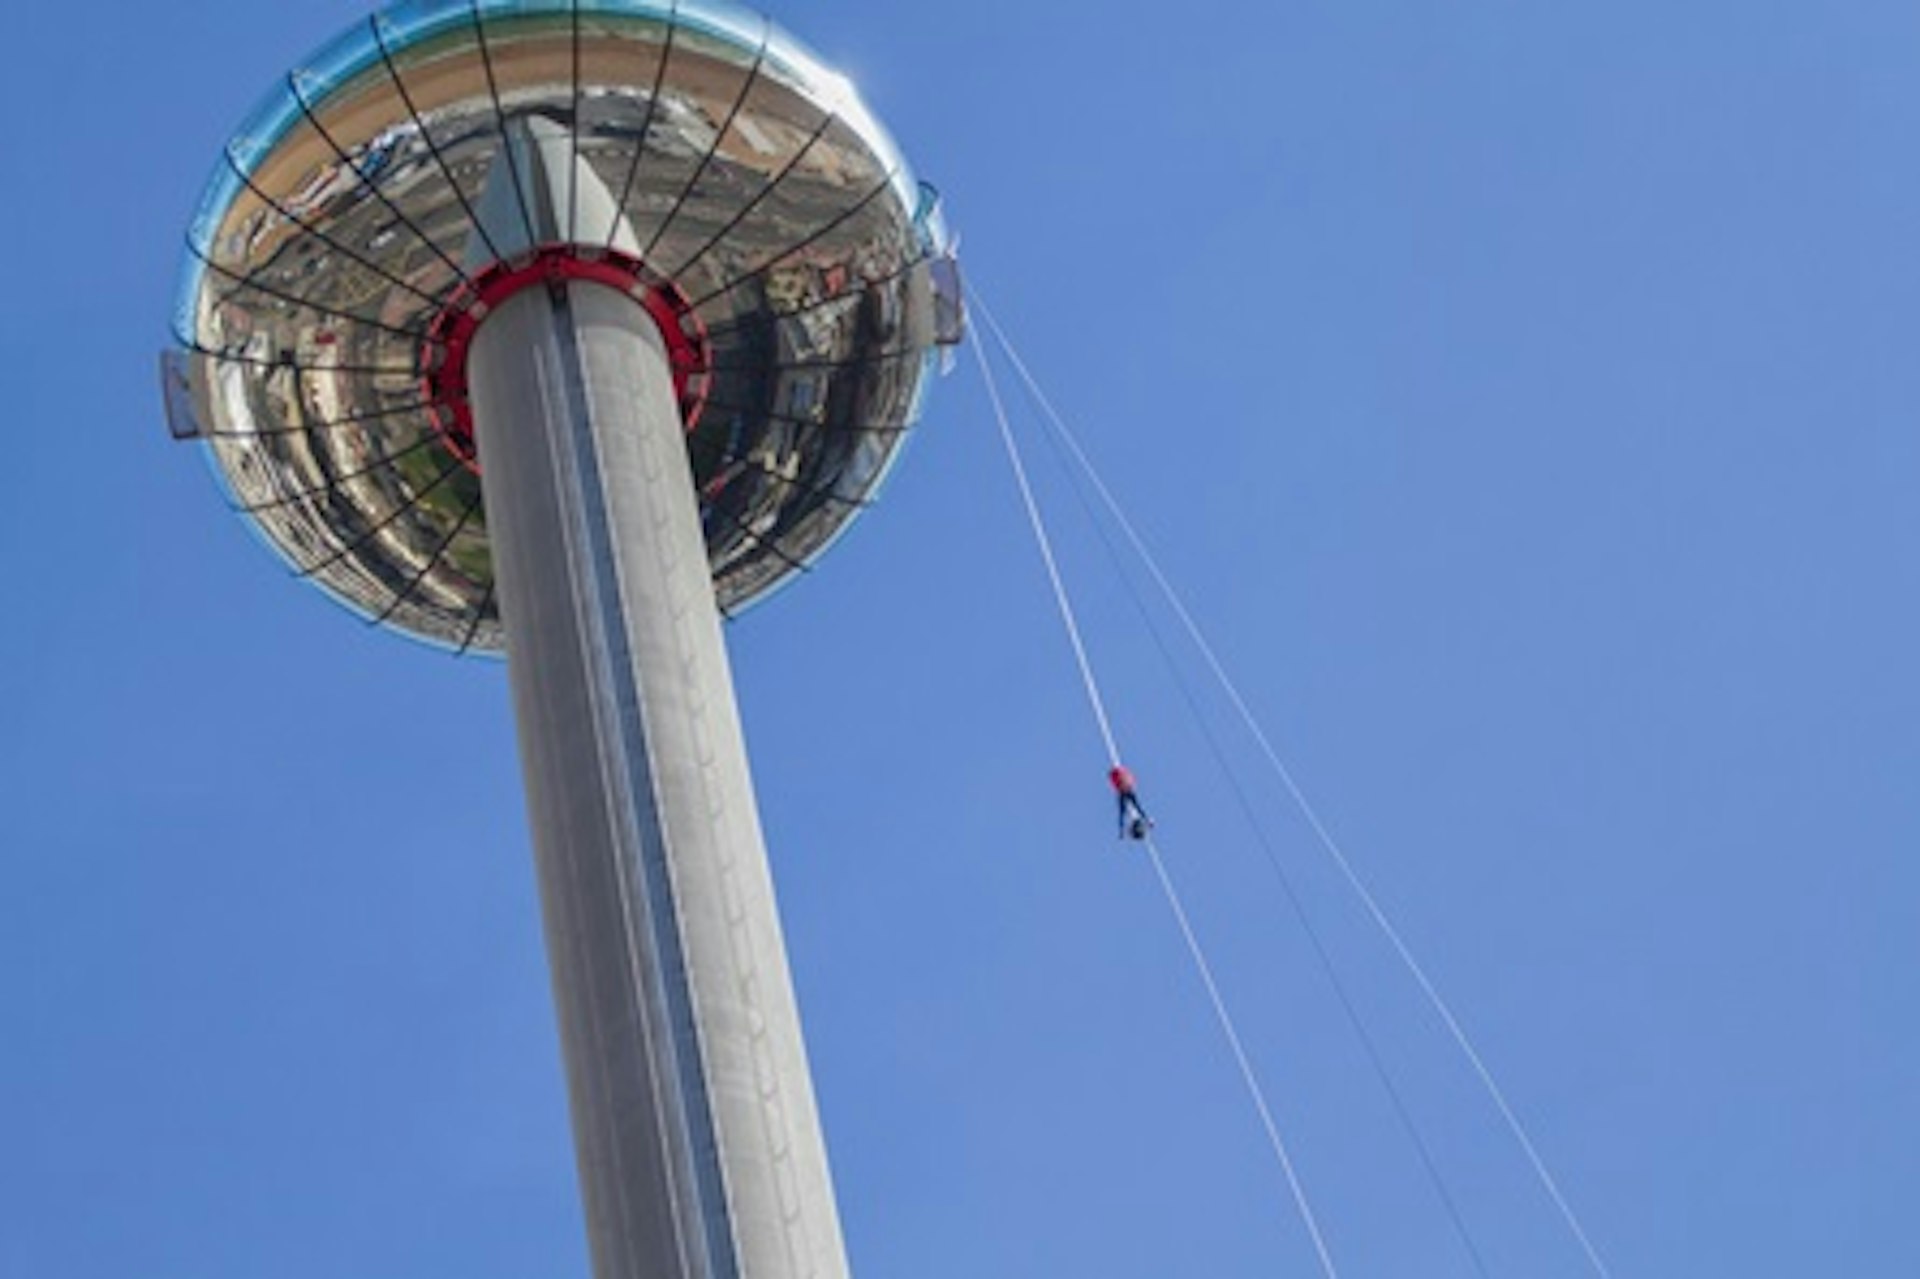 iDrop Abseil Experience at the British Airways i360 1